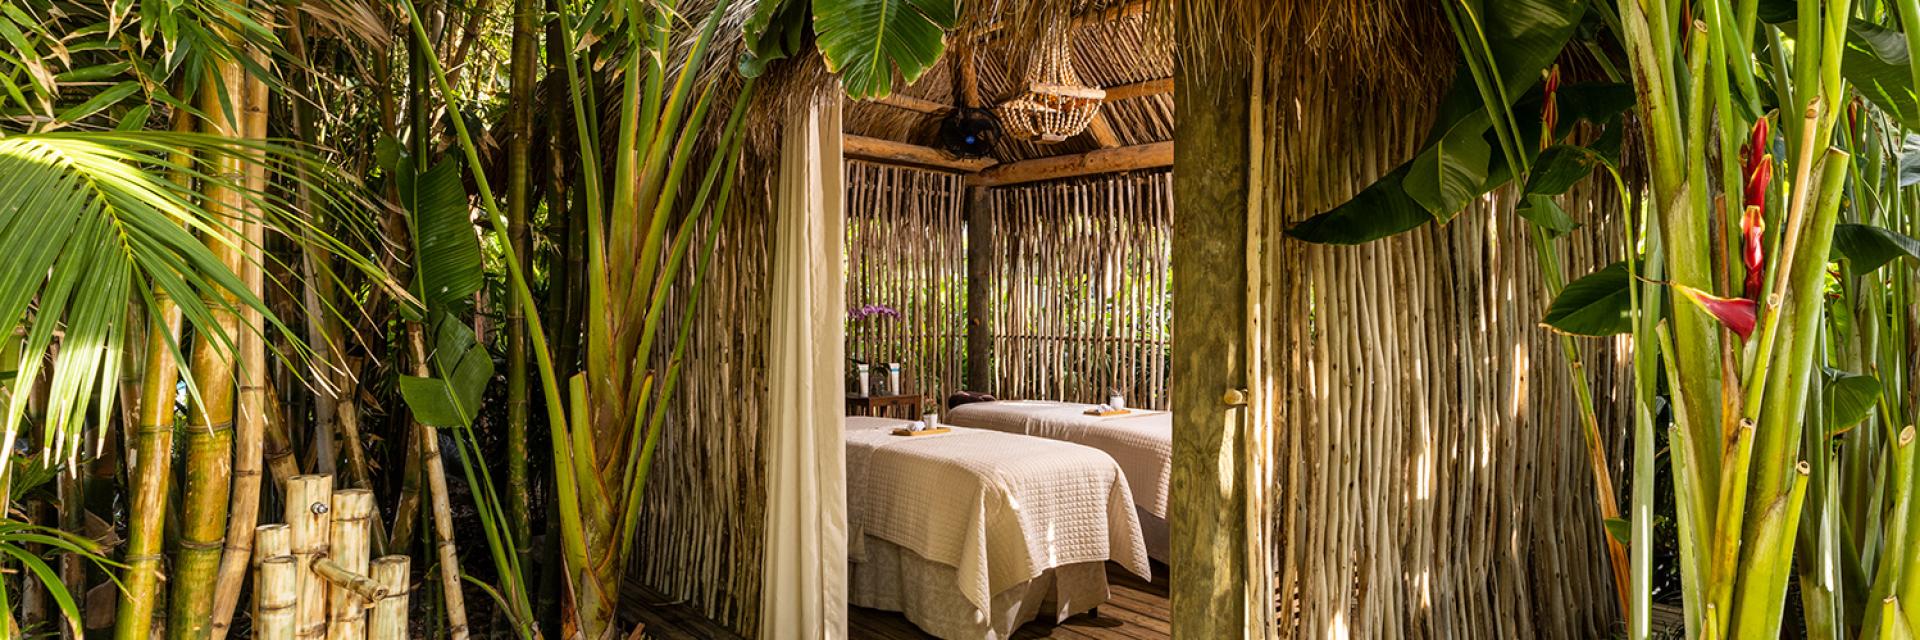 Outdoor Double Massage at The Palms Hotel